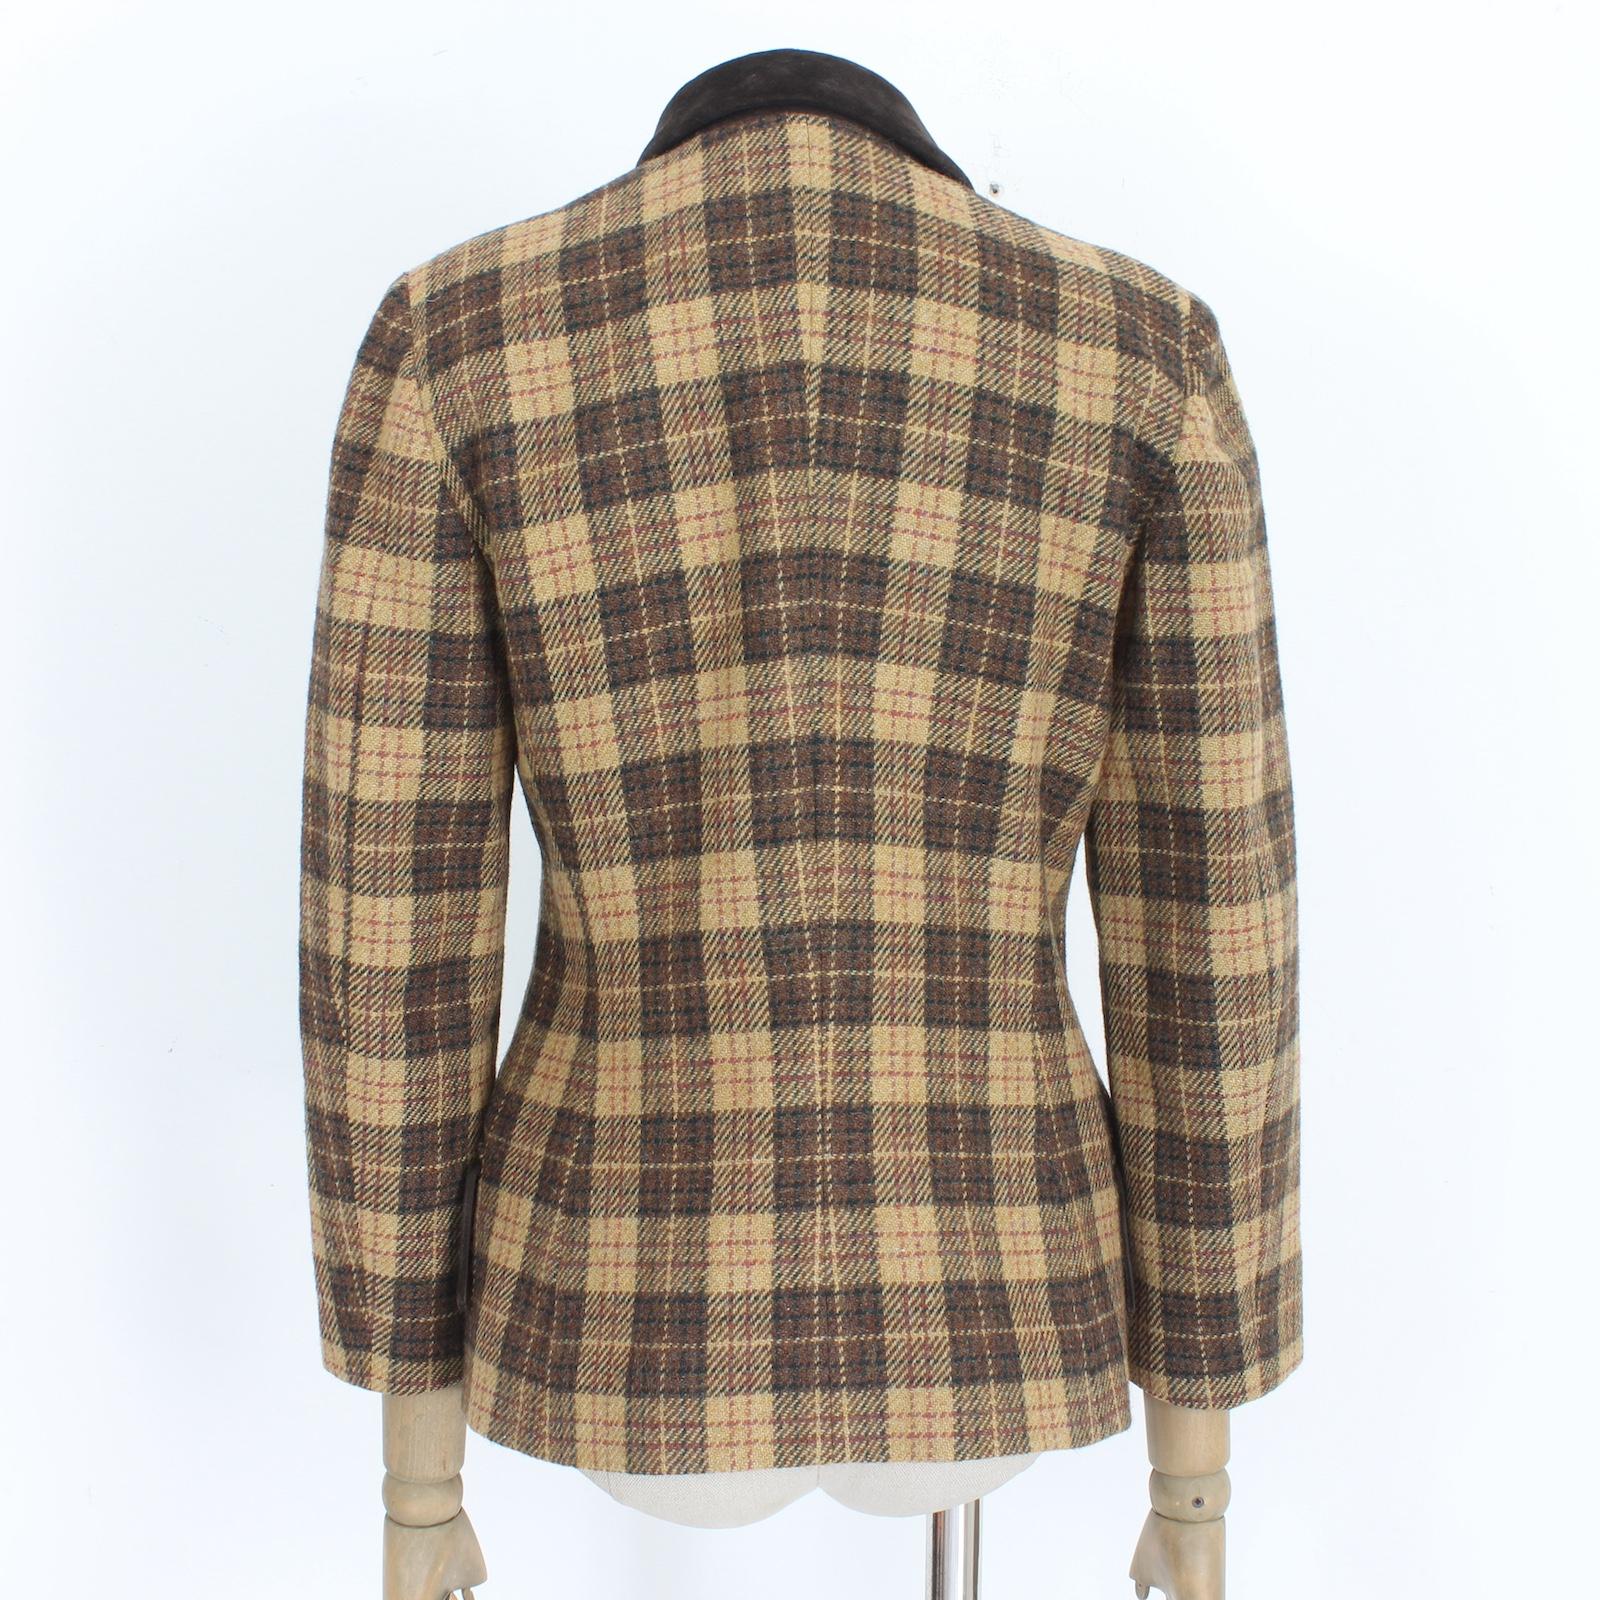 Moschino Cheap and Chic vintage 90s blazer. Beige and brown color with checked pattern, velvet collar and pockets. 80% wool, 20% camel fabric. Made in Italy.

Size: 44 It 10 Us 12 Uk

Shoulder: 44 cm
Bust/Chest: 47 cm
Sleeve: 56 cm
Length: 68 cm